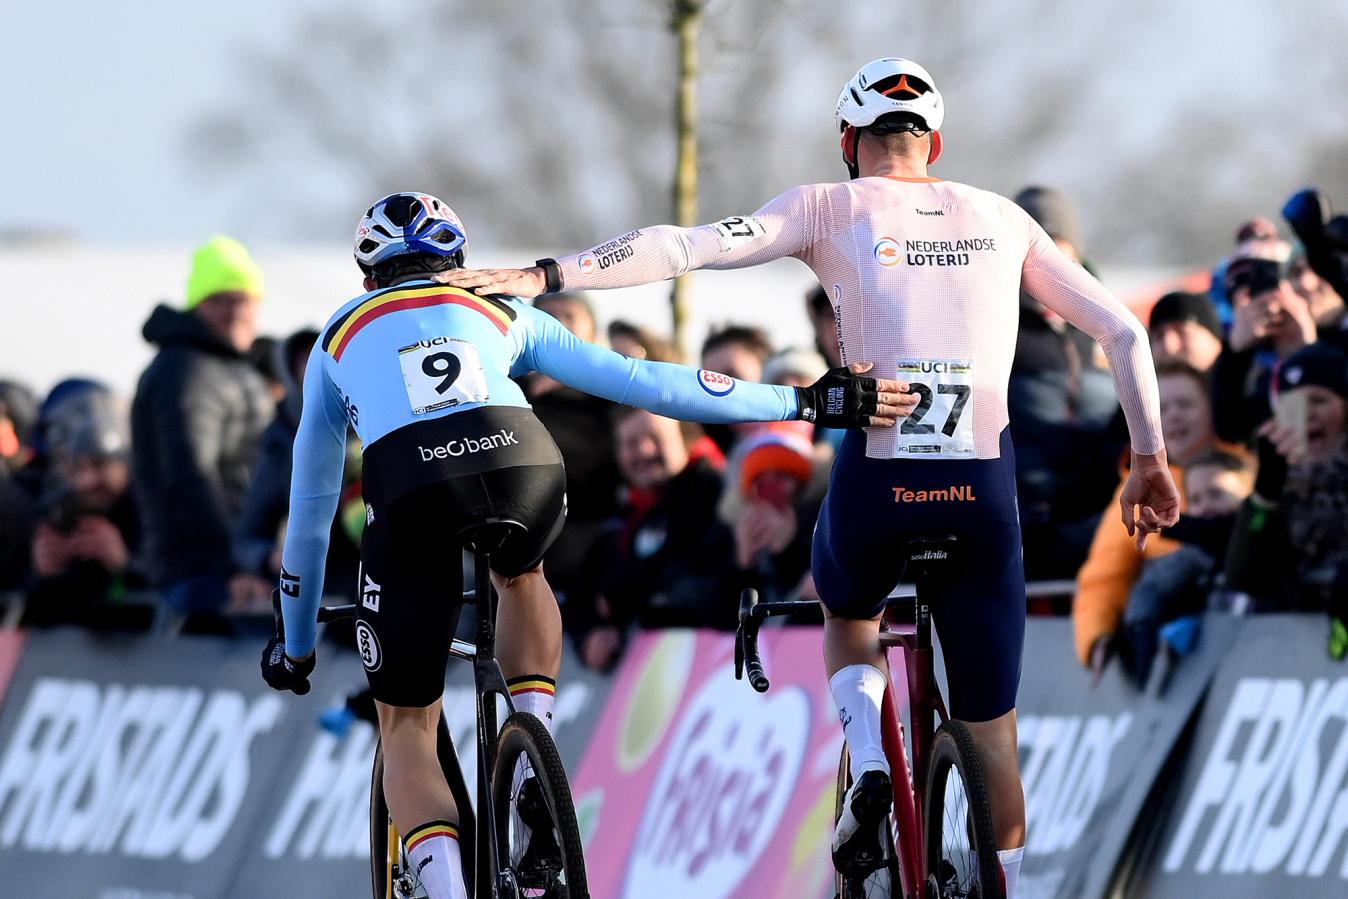 Mathieu van der Poel and Wout van Aert have produced cycling's most entertaining rivalry for decades, both on the road and in cyclocross